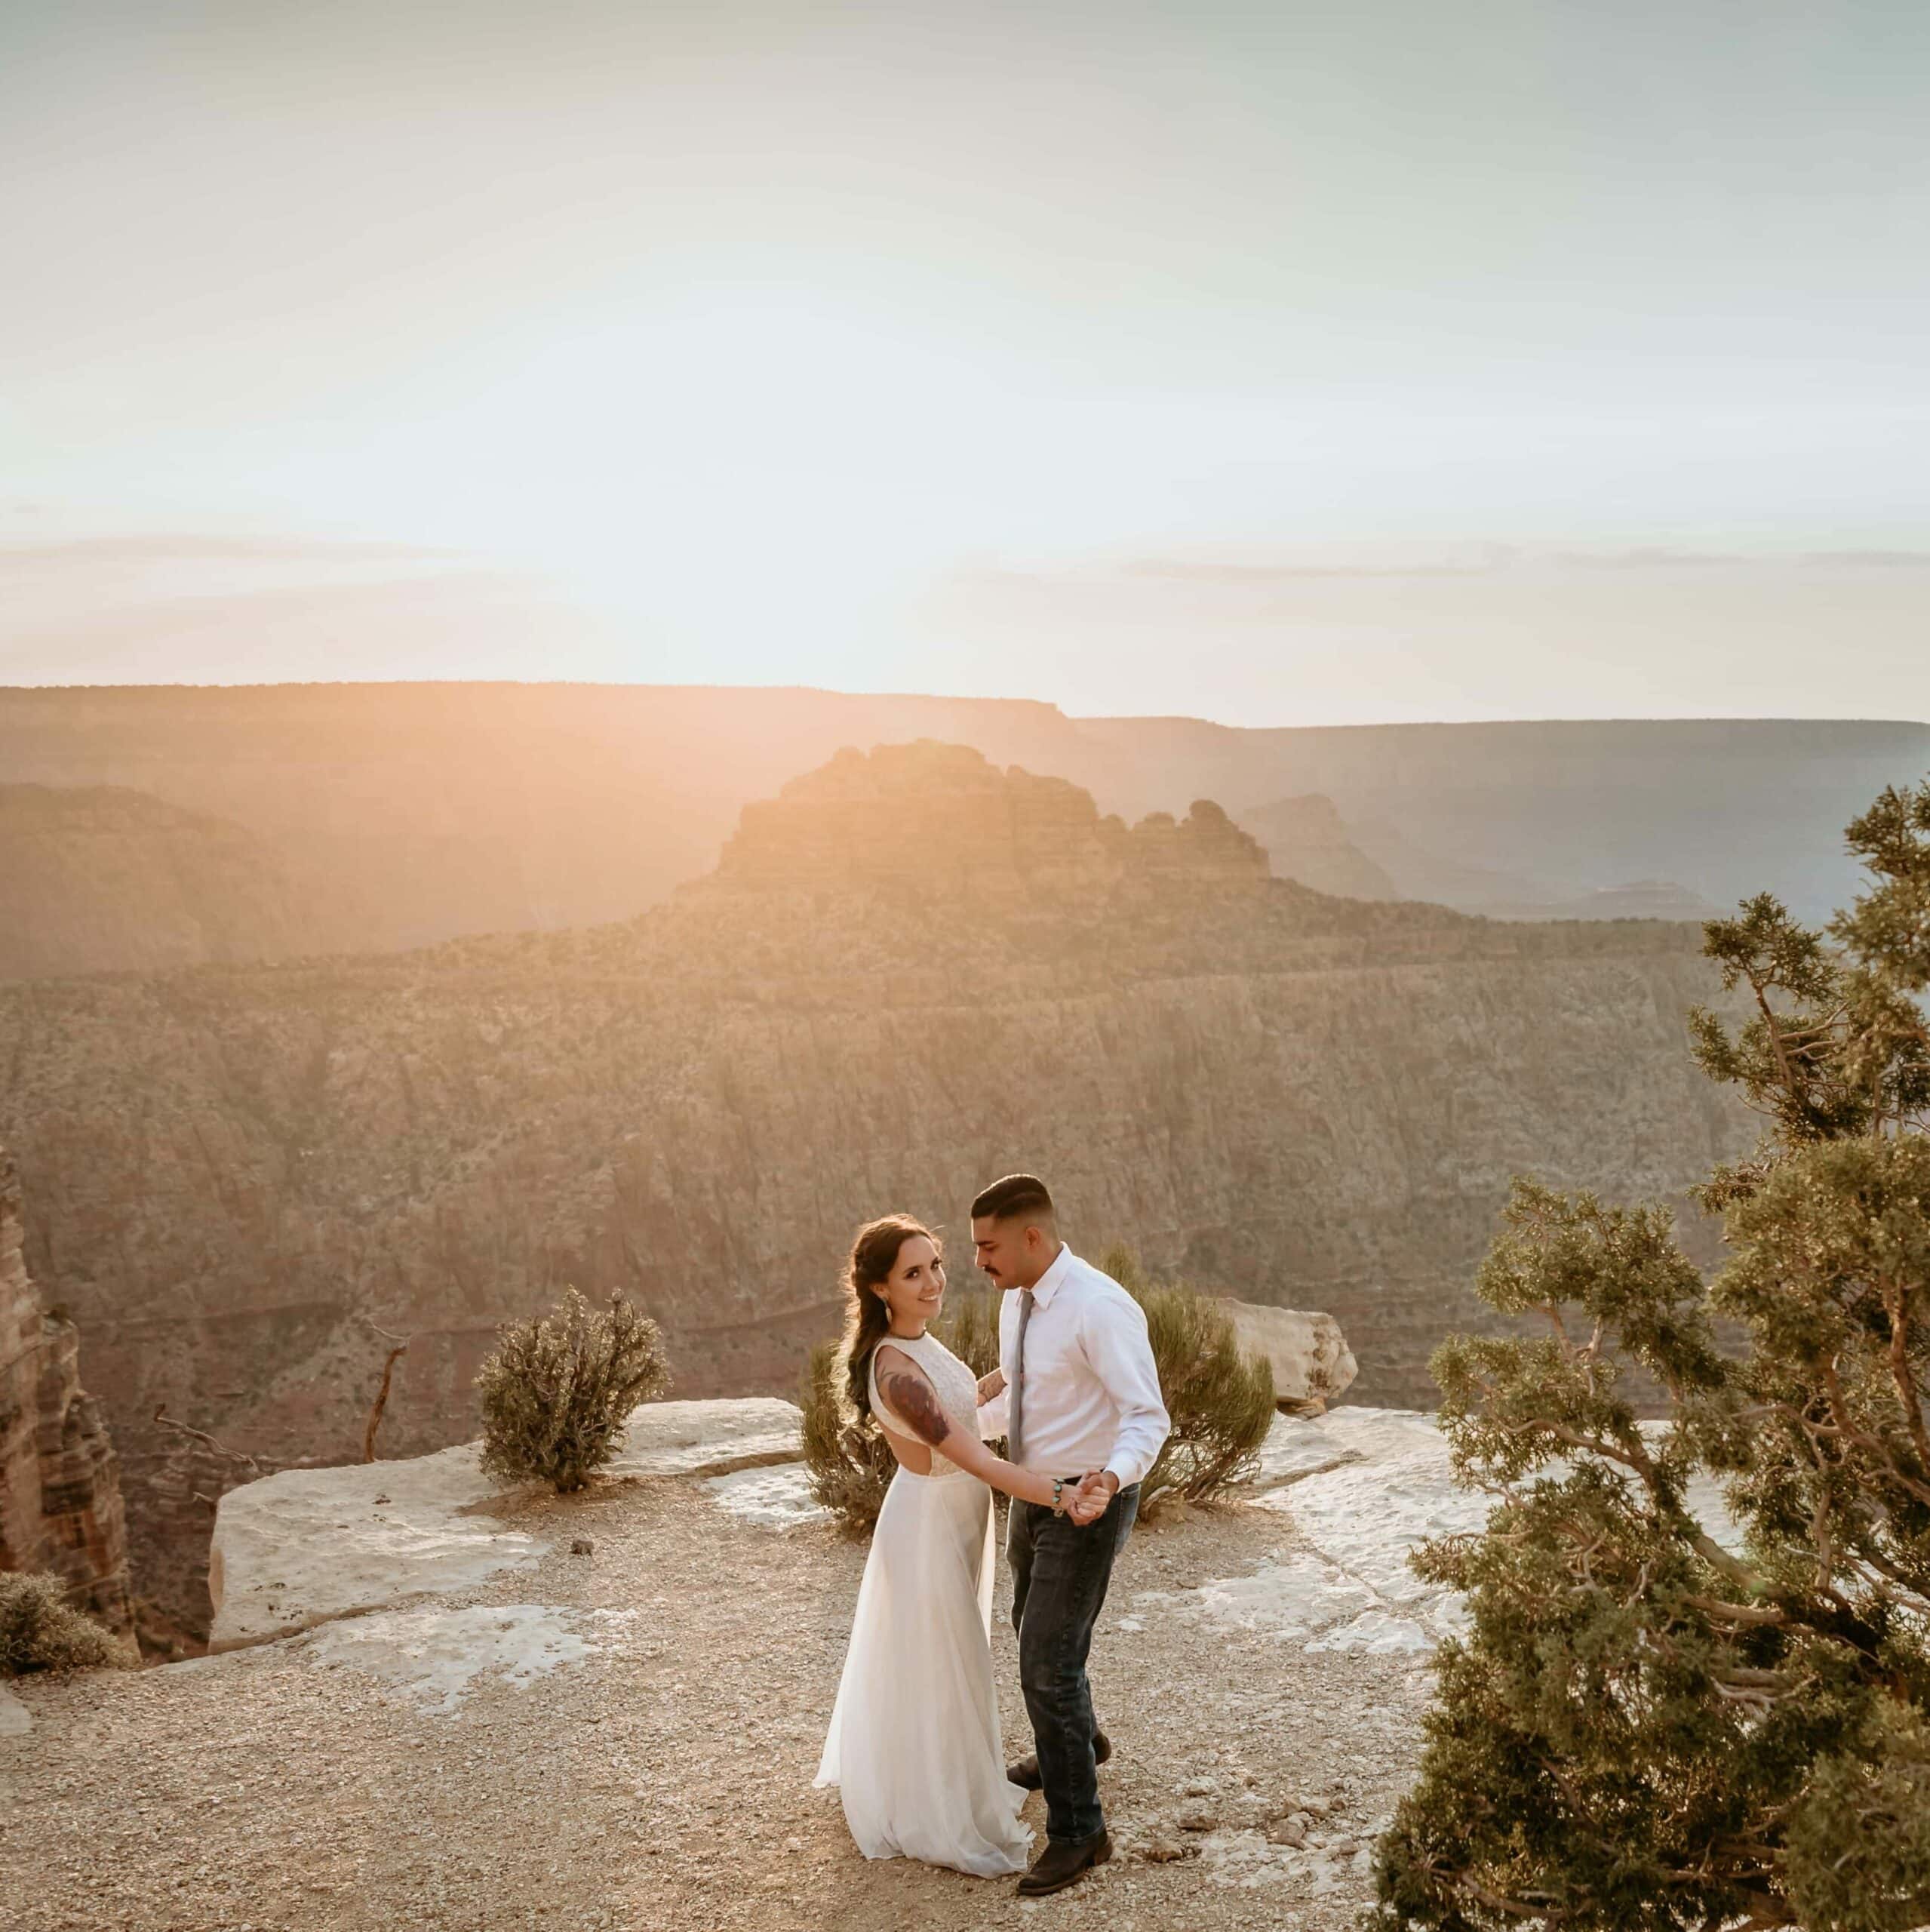 Bride and groom who chose an elopement package instead of a big wedding dancing at the edge of the Grand Canyon at sunset